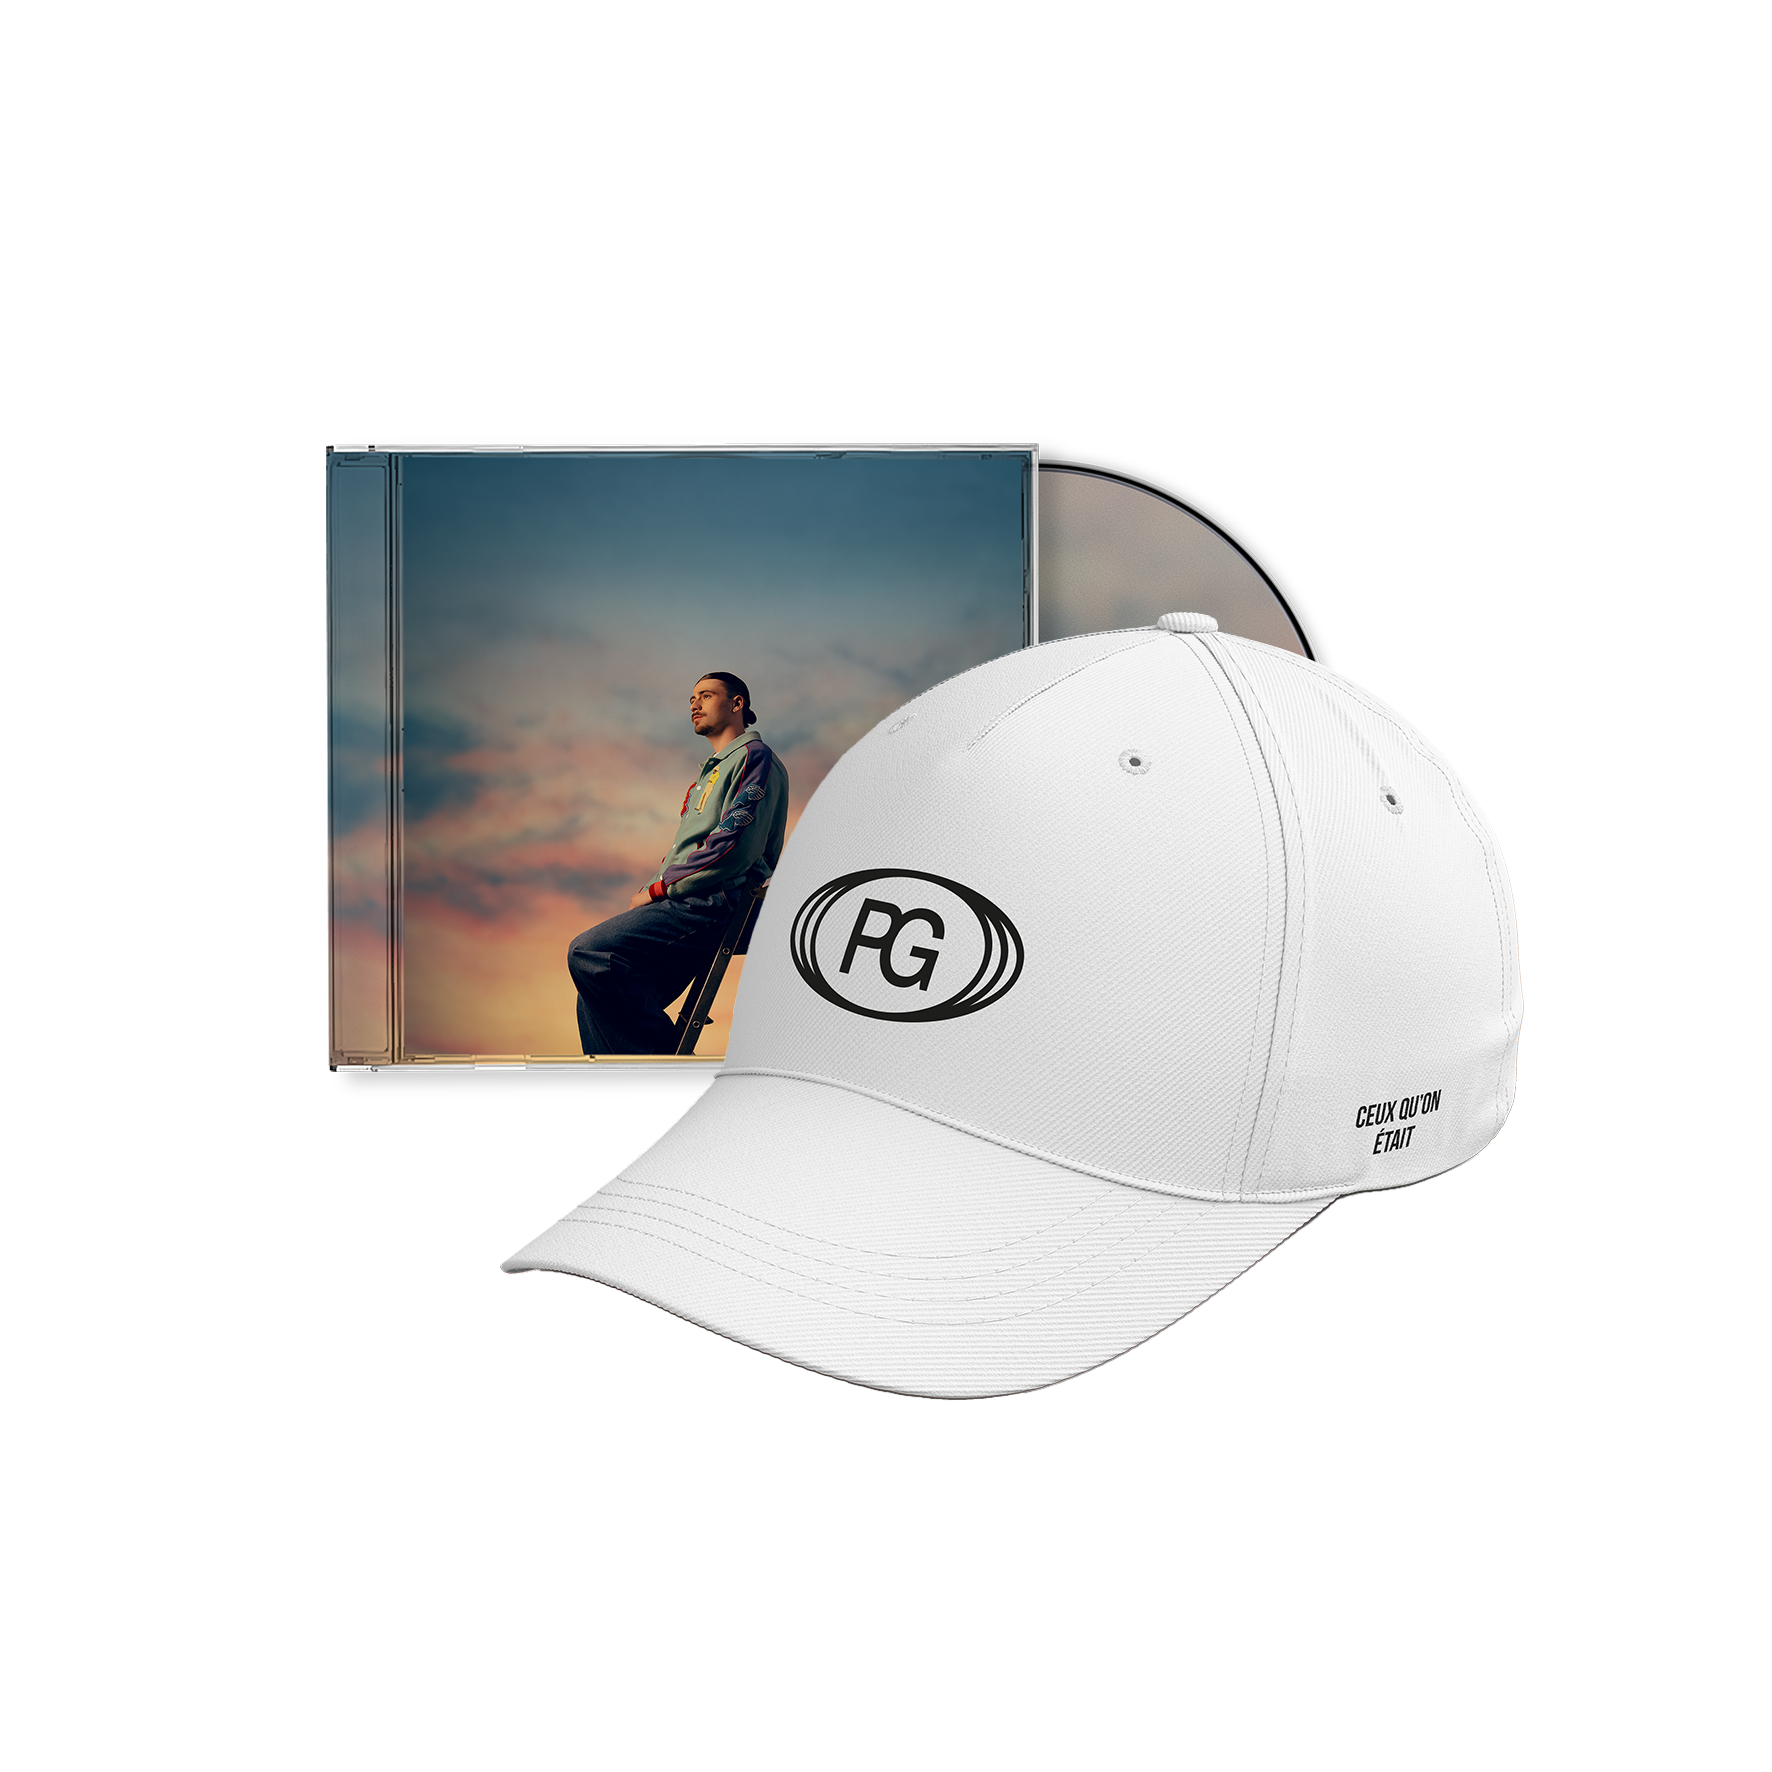 Pack CD + casquette blanche